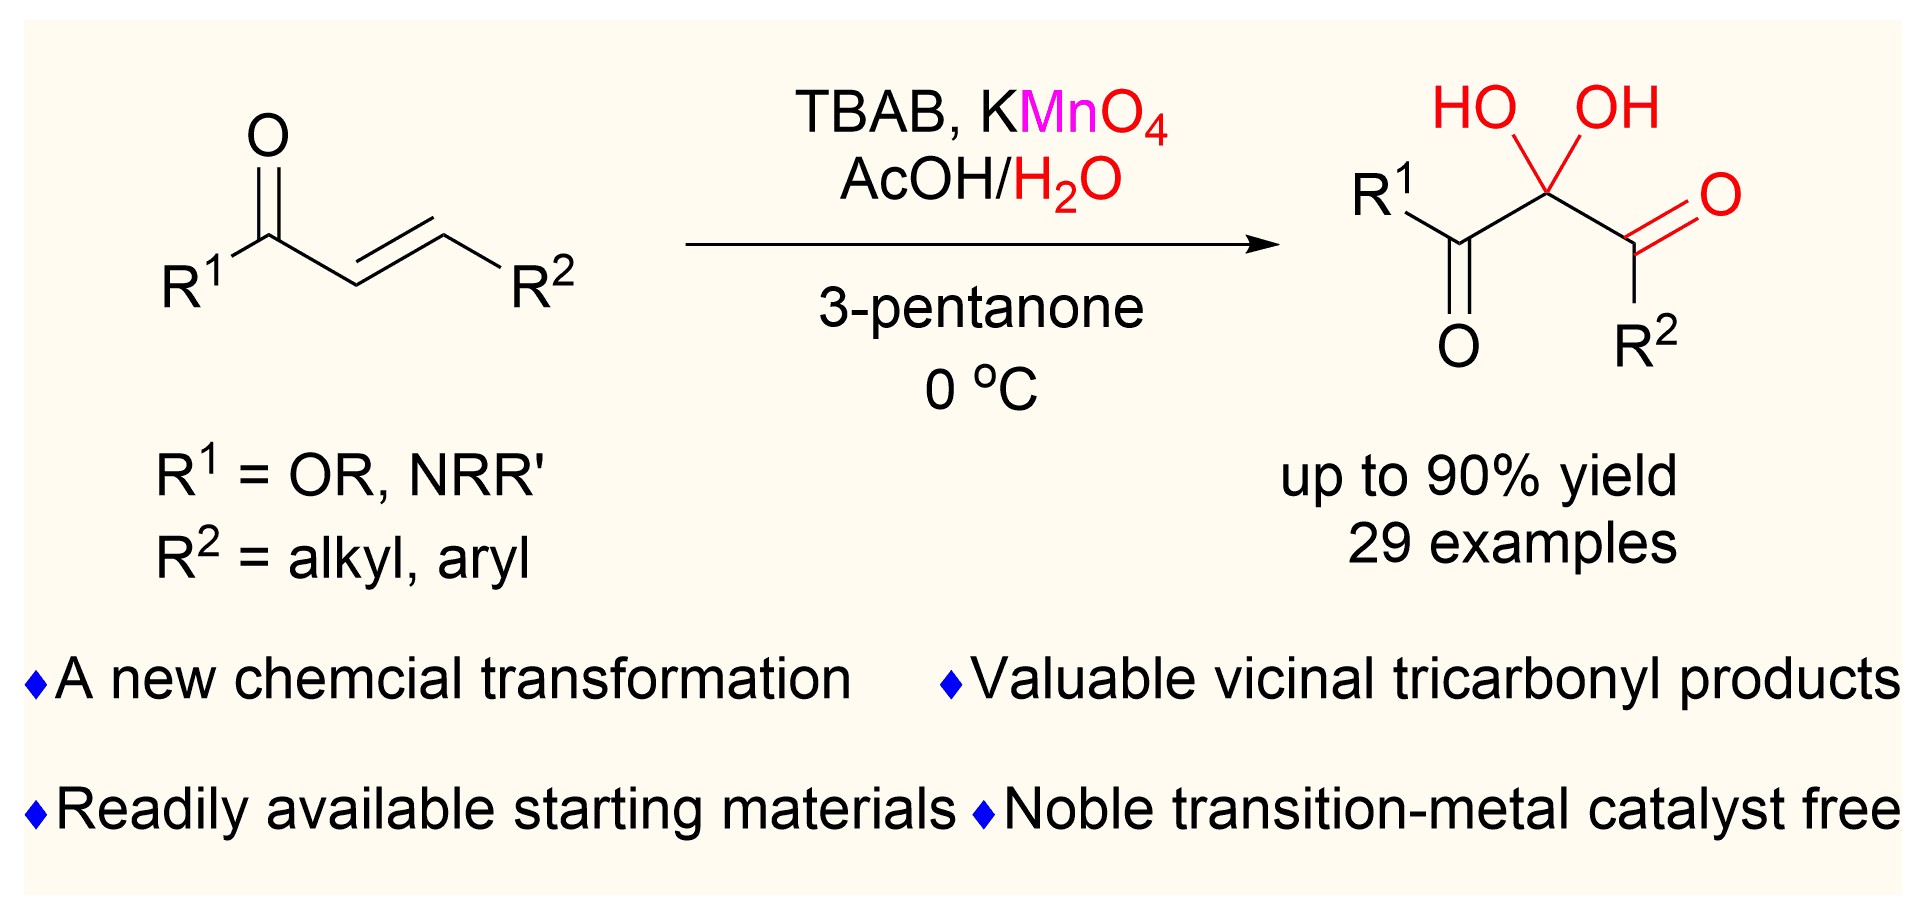 17. Permanganate Oxidation of α,β-Unsaturated Carbonyls to Vicinal Tricarbonyls